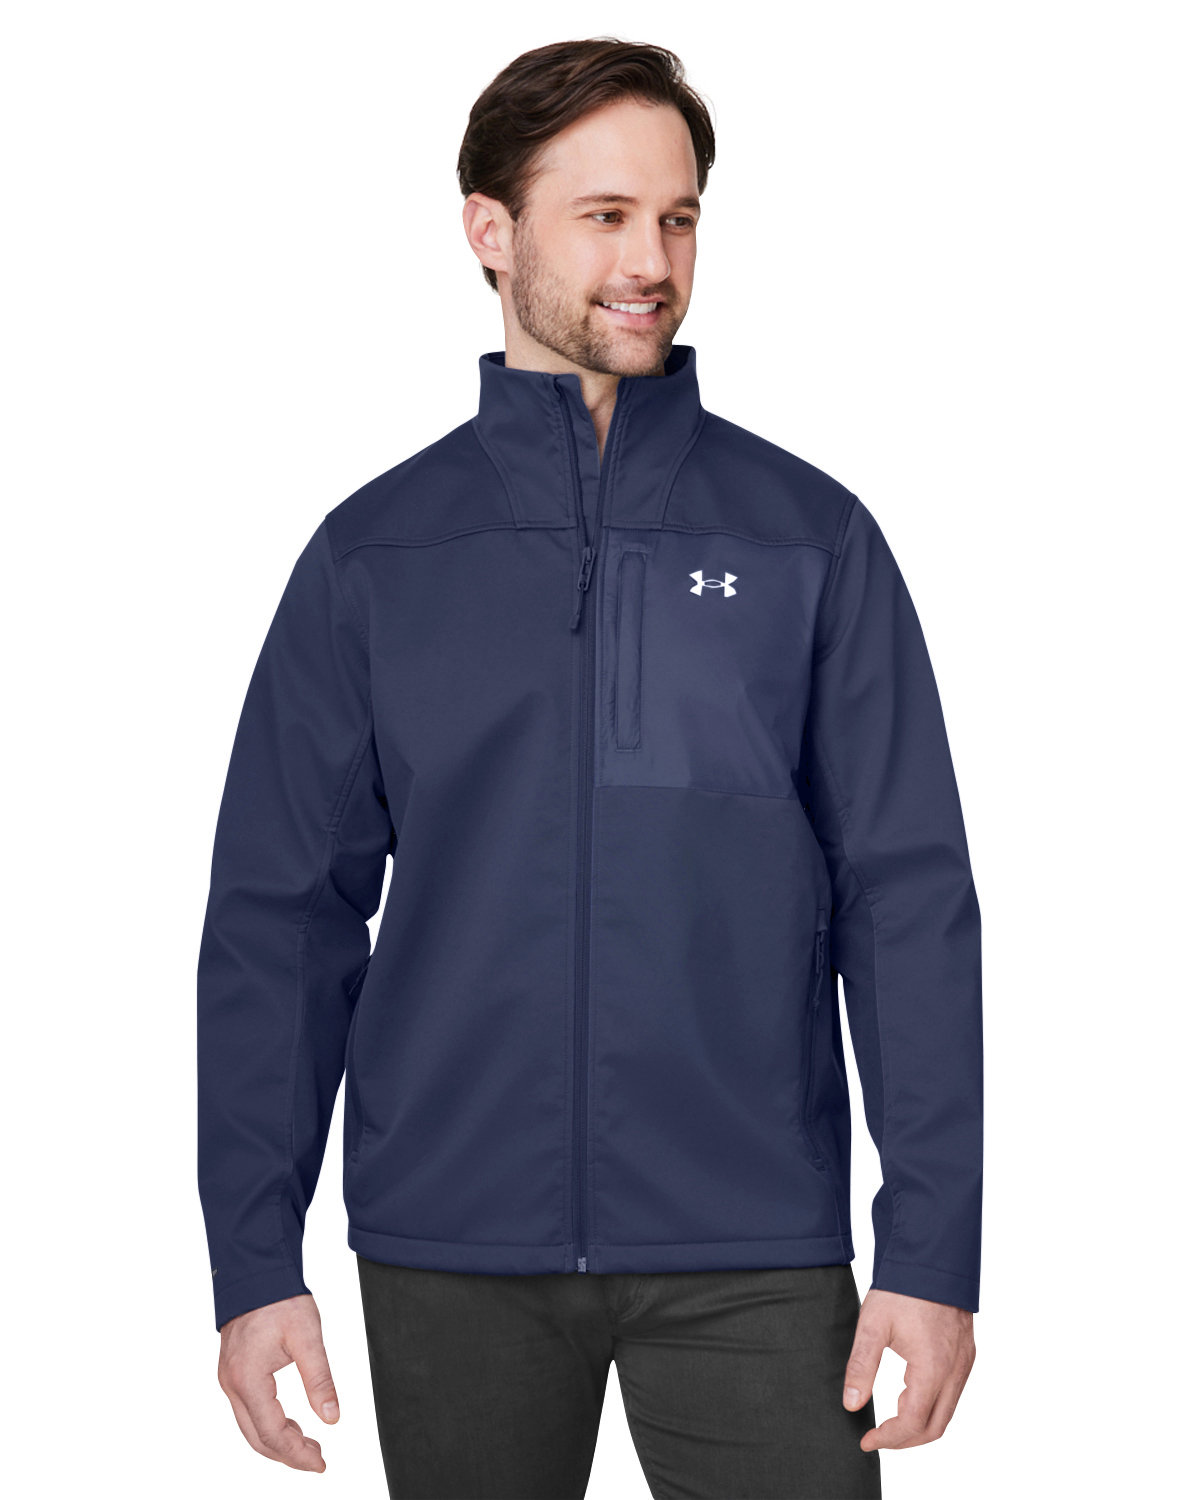 Under armour Under Armour ColdGear Infrared Coats, Jackets & Vests for Men